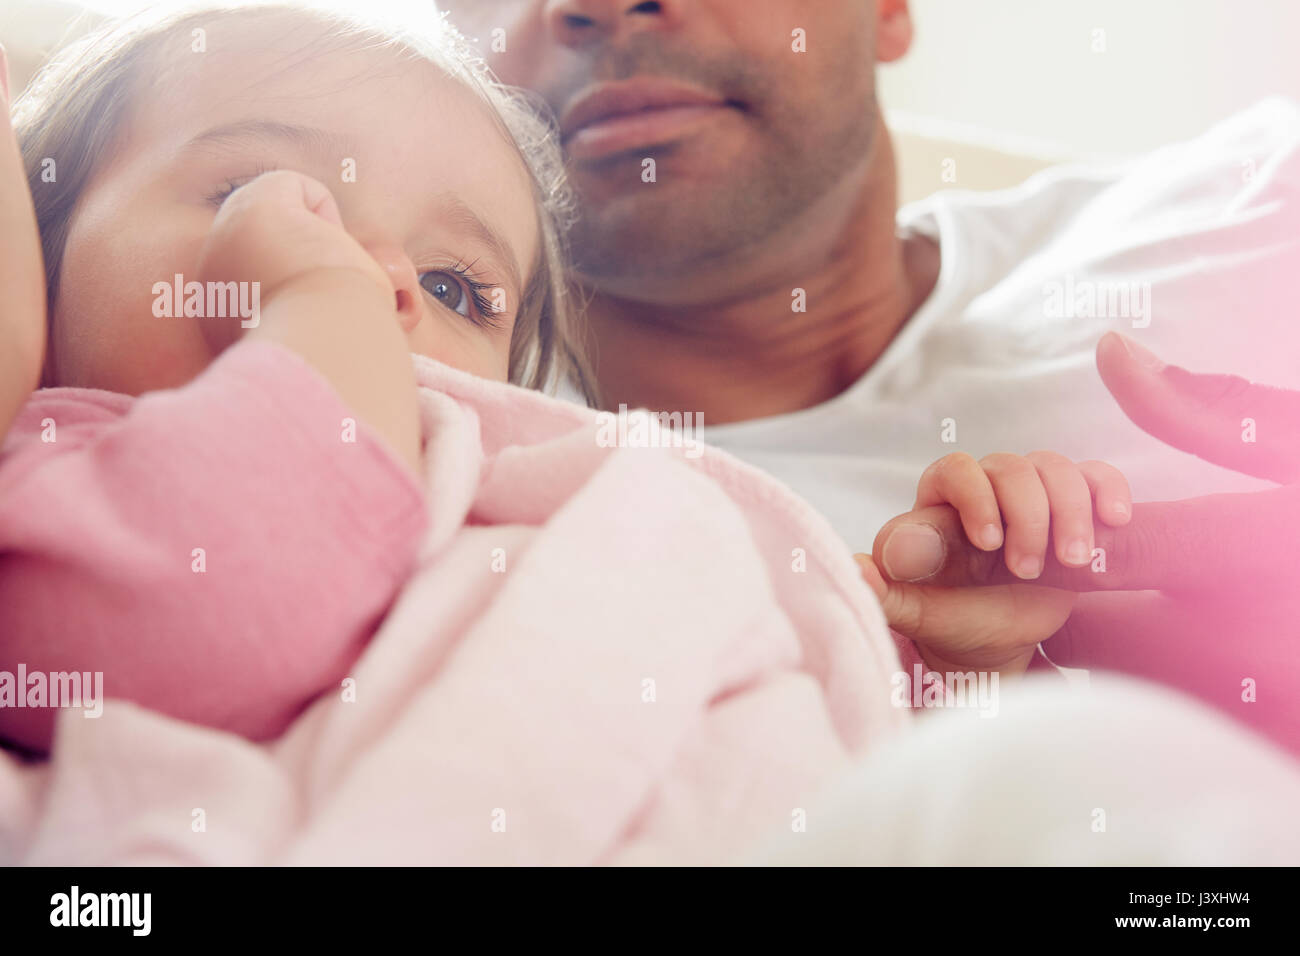 Baby girl sucking thumb with comfort blanket on father's lap Stock Photo